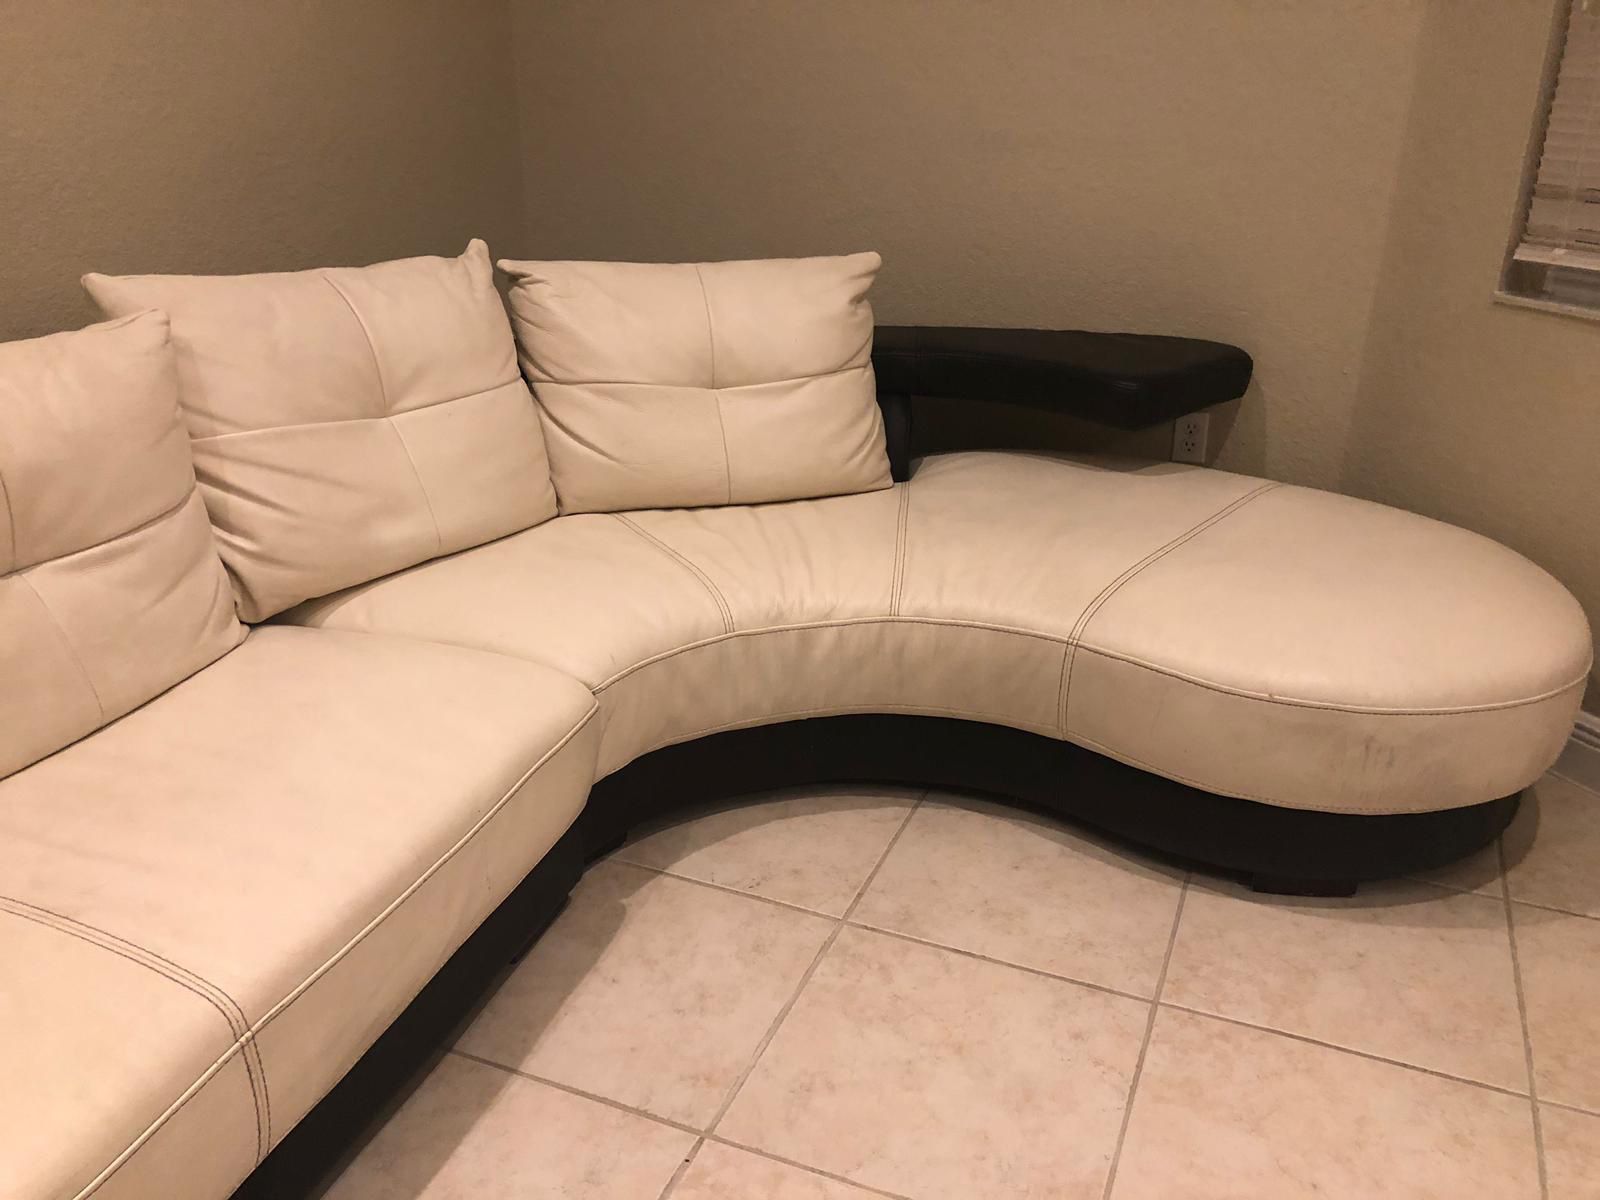 2 piece sectional white leather couch make an offer need gone today